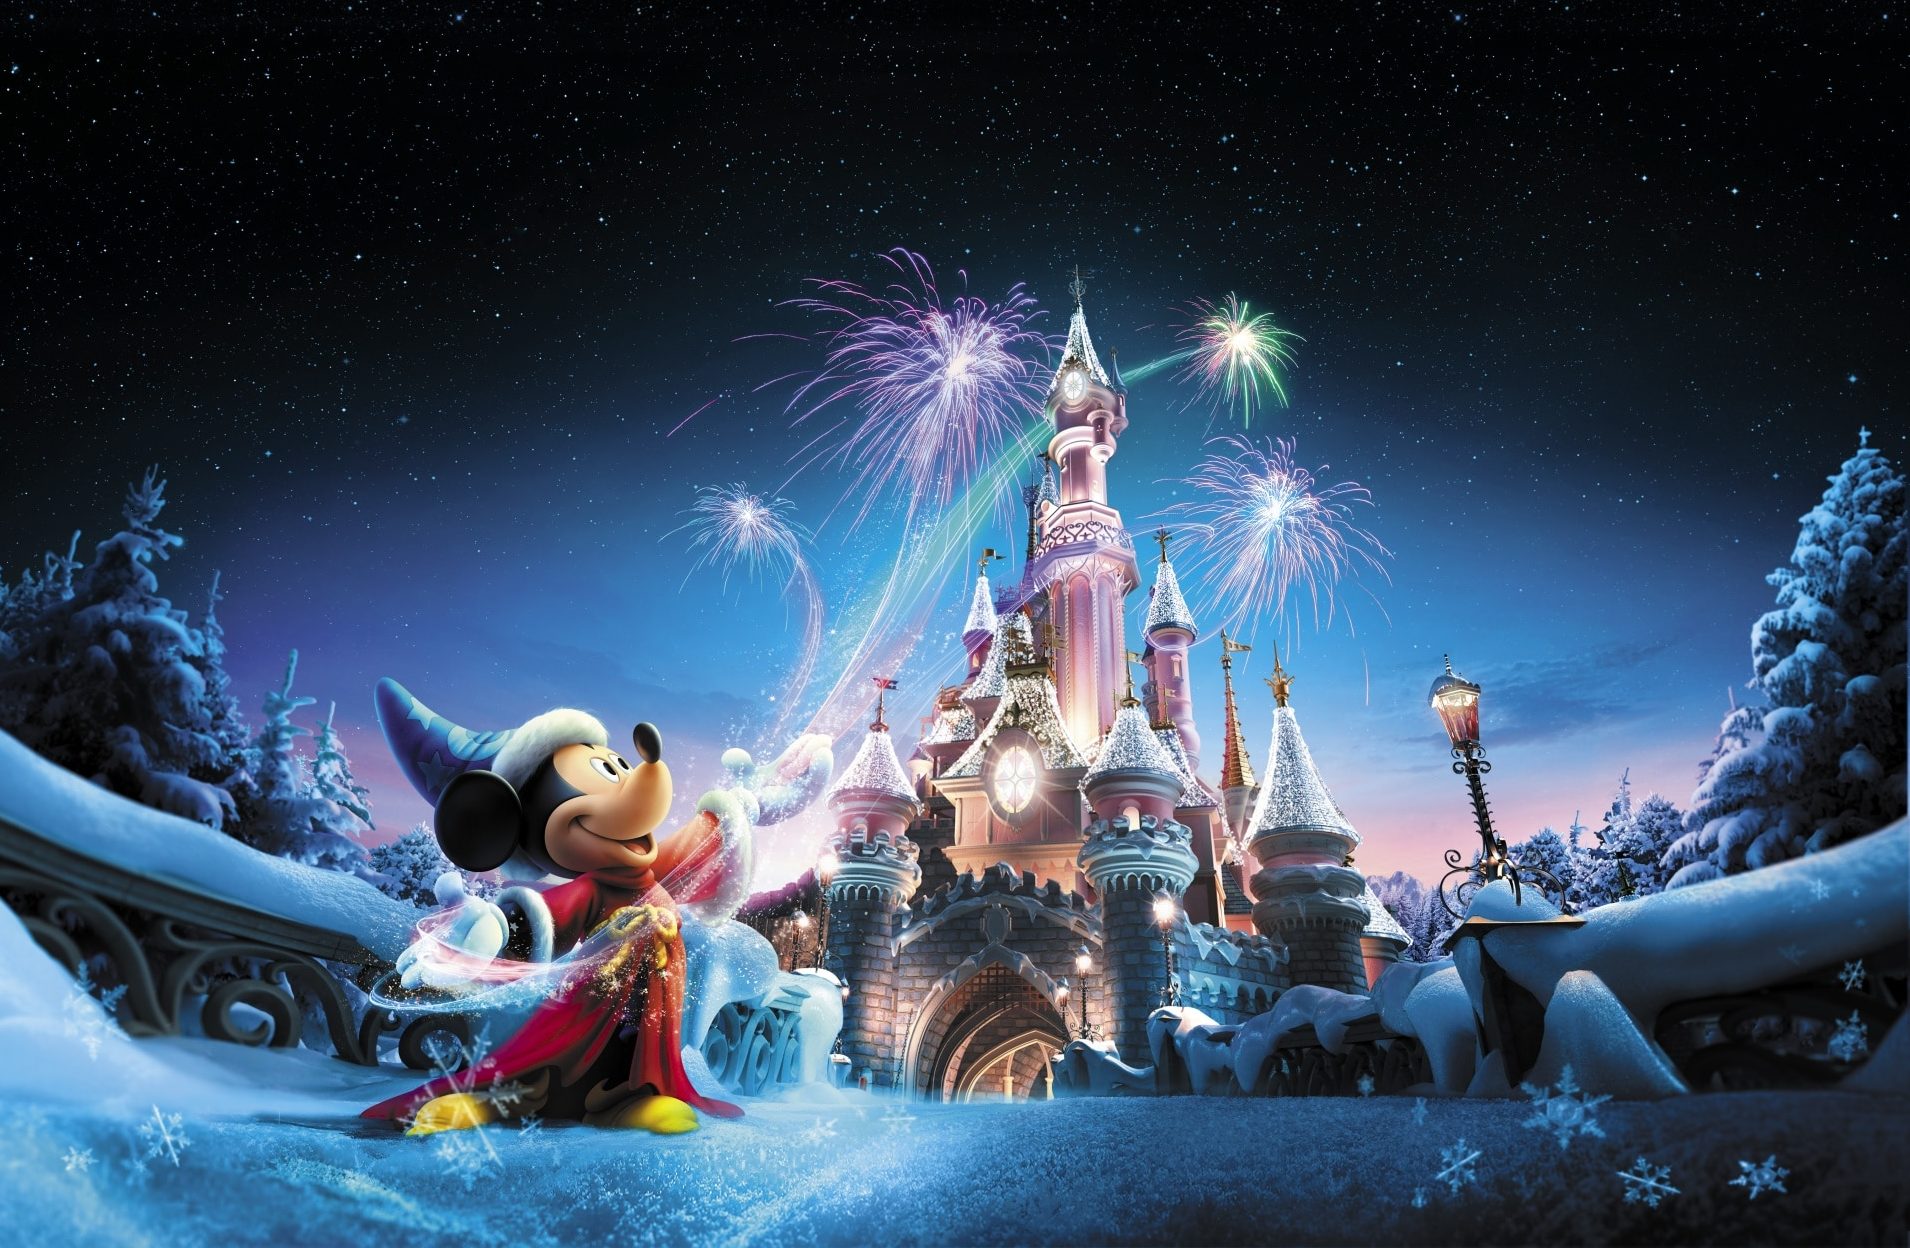 Christmas Disneyland Paris 2017: What to expect - Travel to the Magic